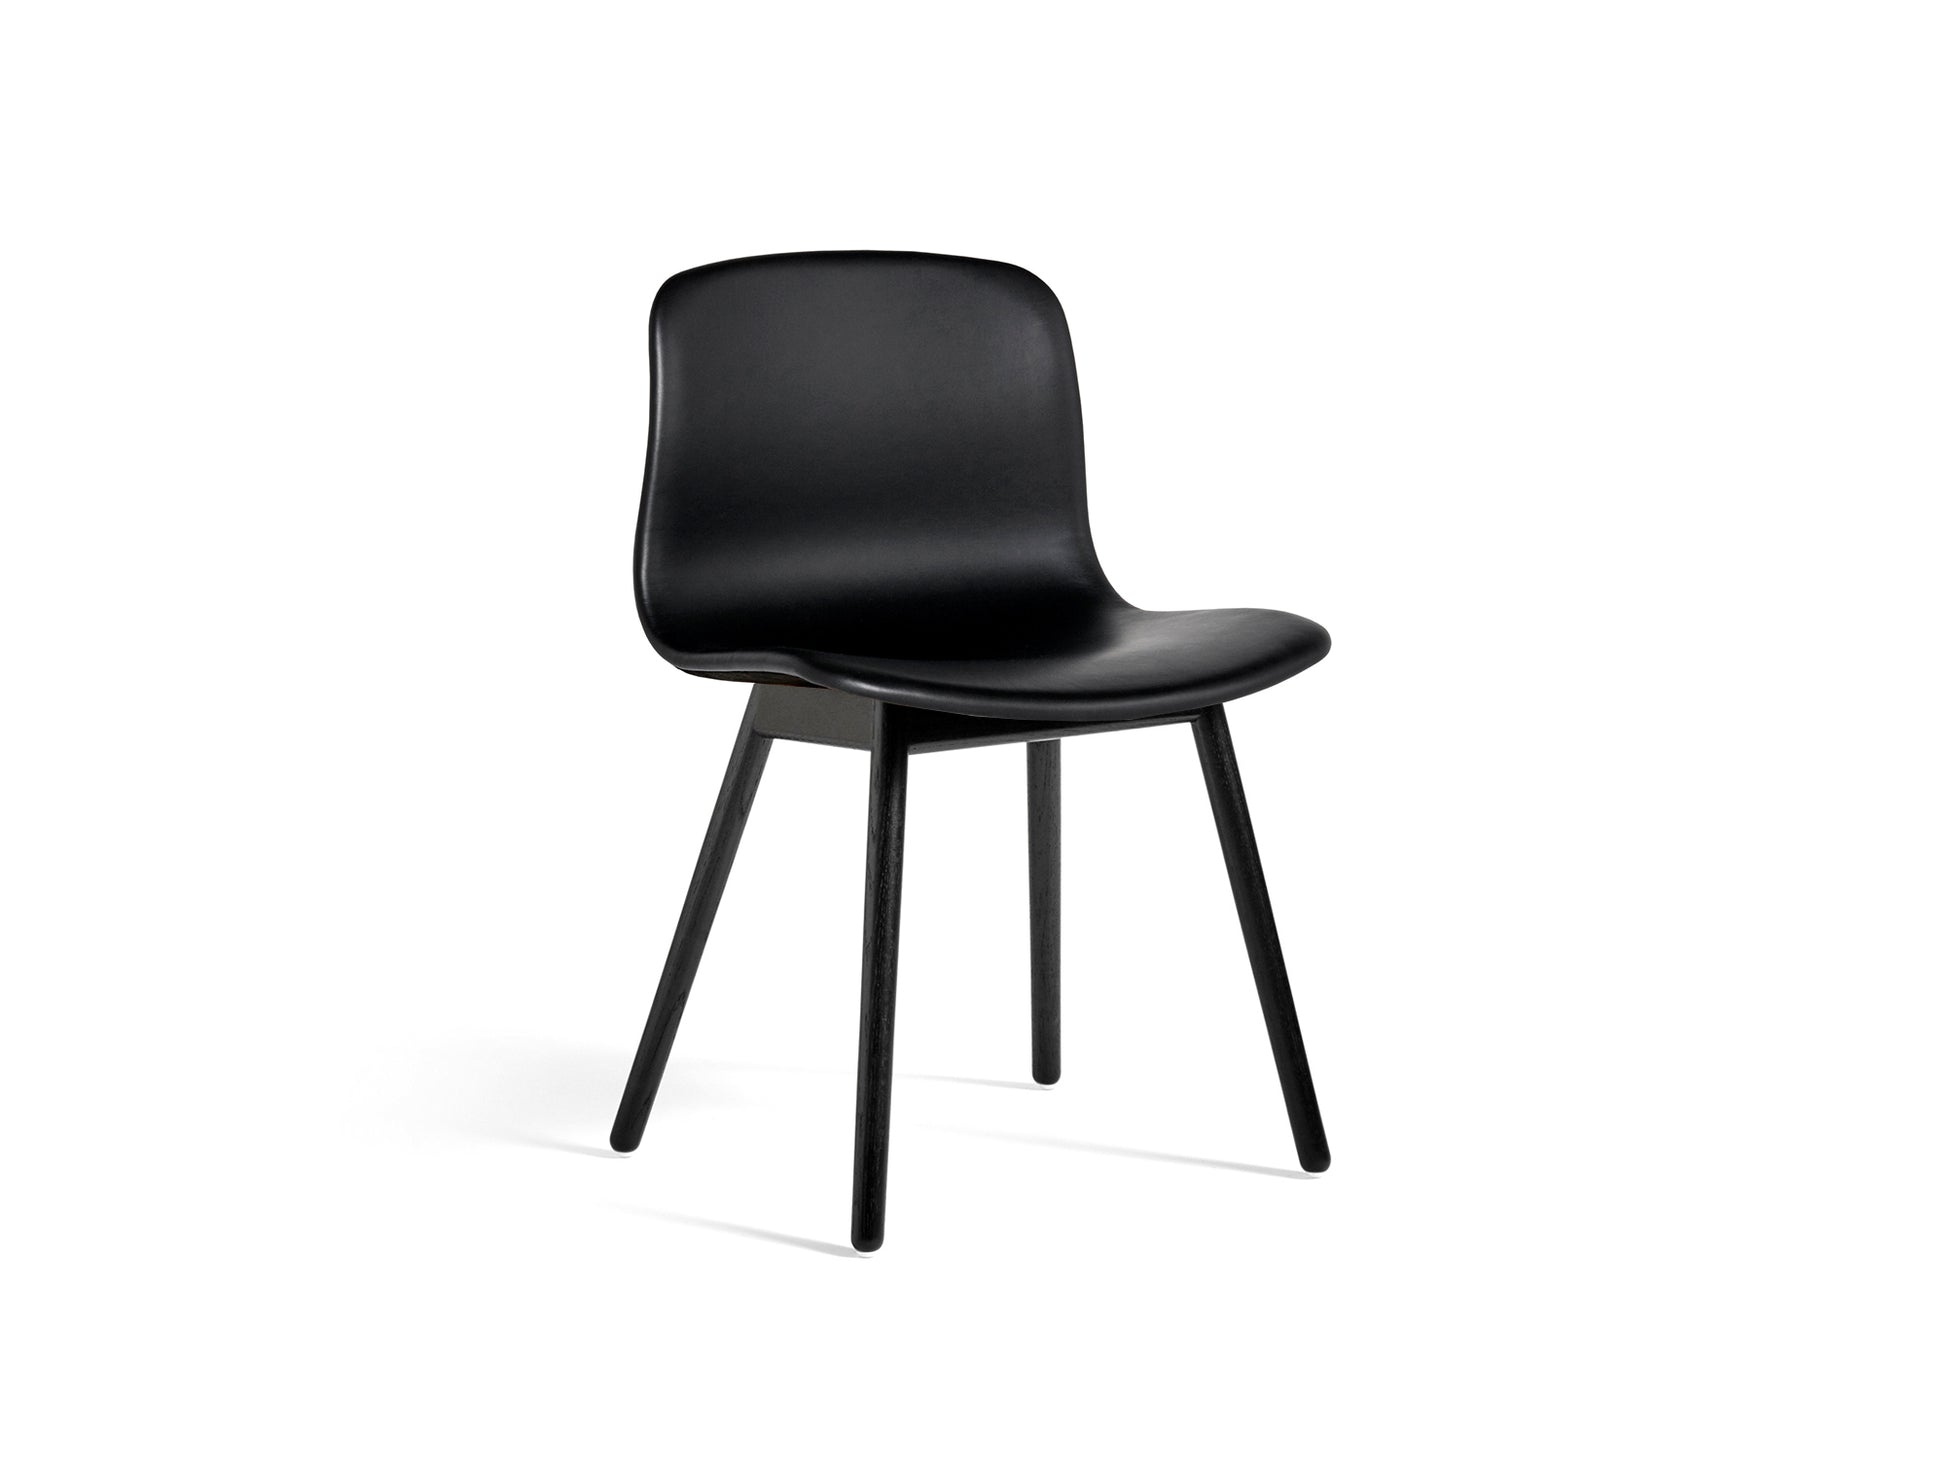 About A Chair AAC 13 by HAY - Black Sense Leather  / Black Lacquered Oak Base